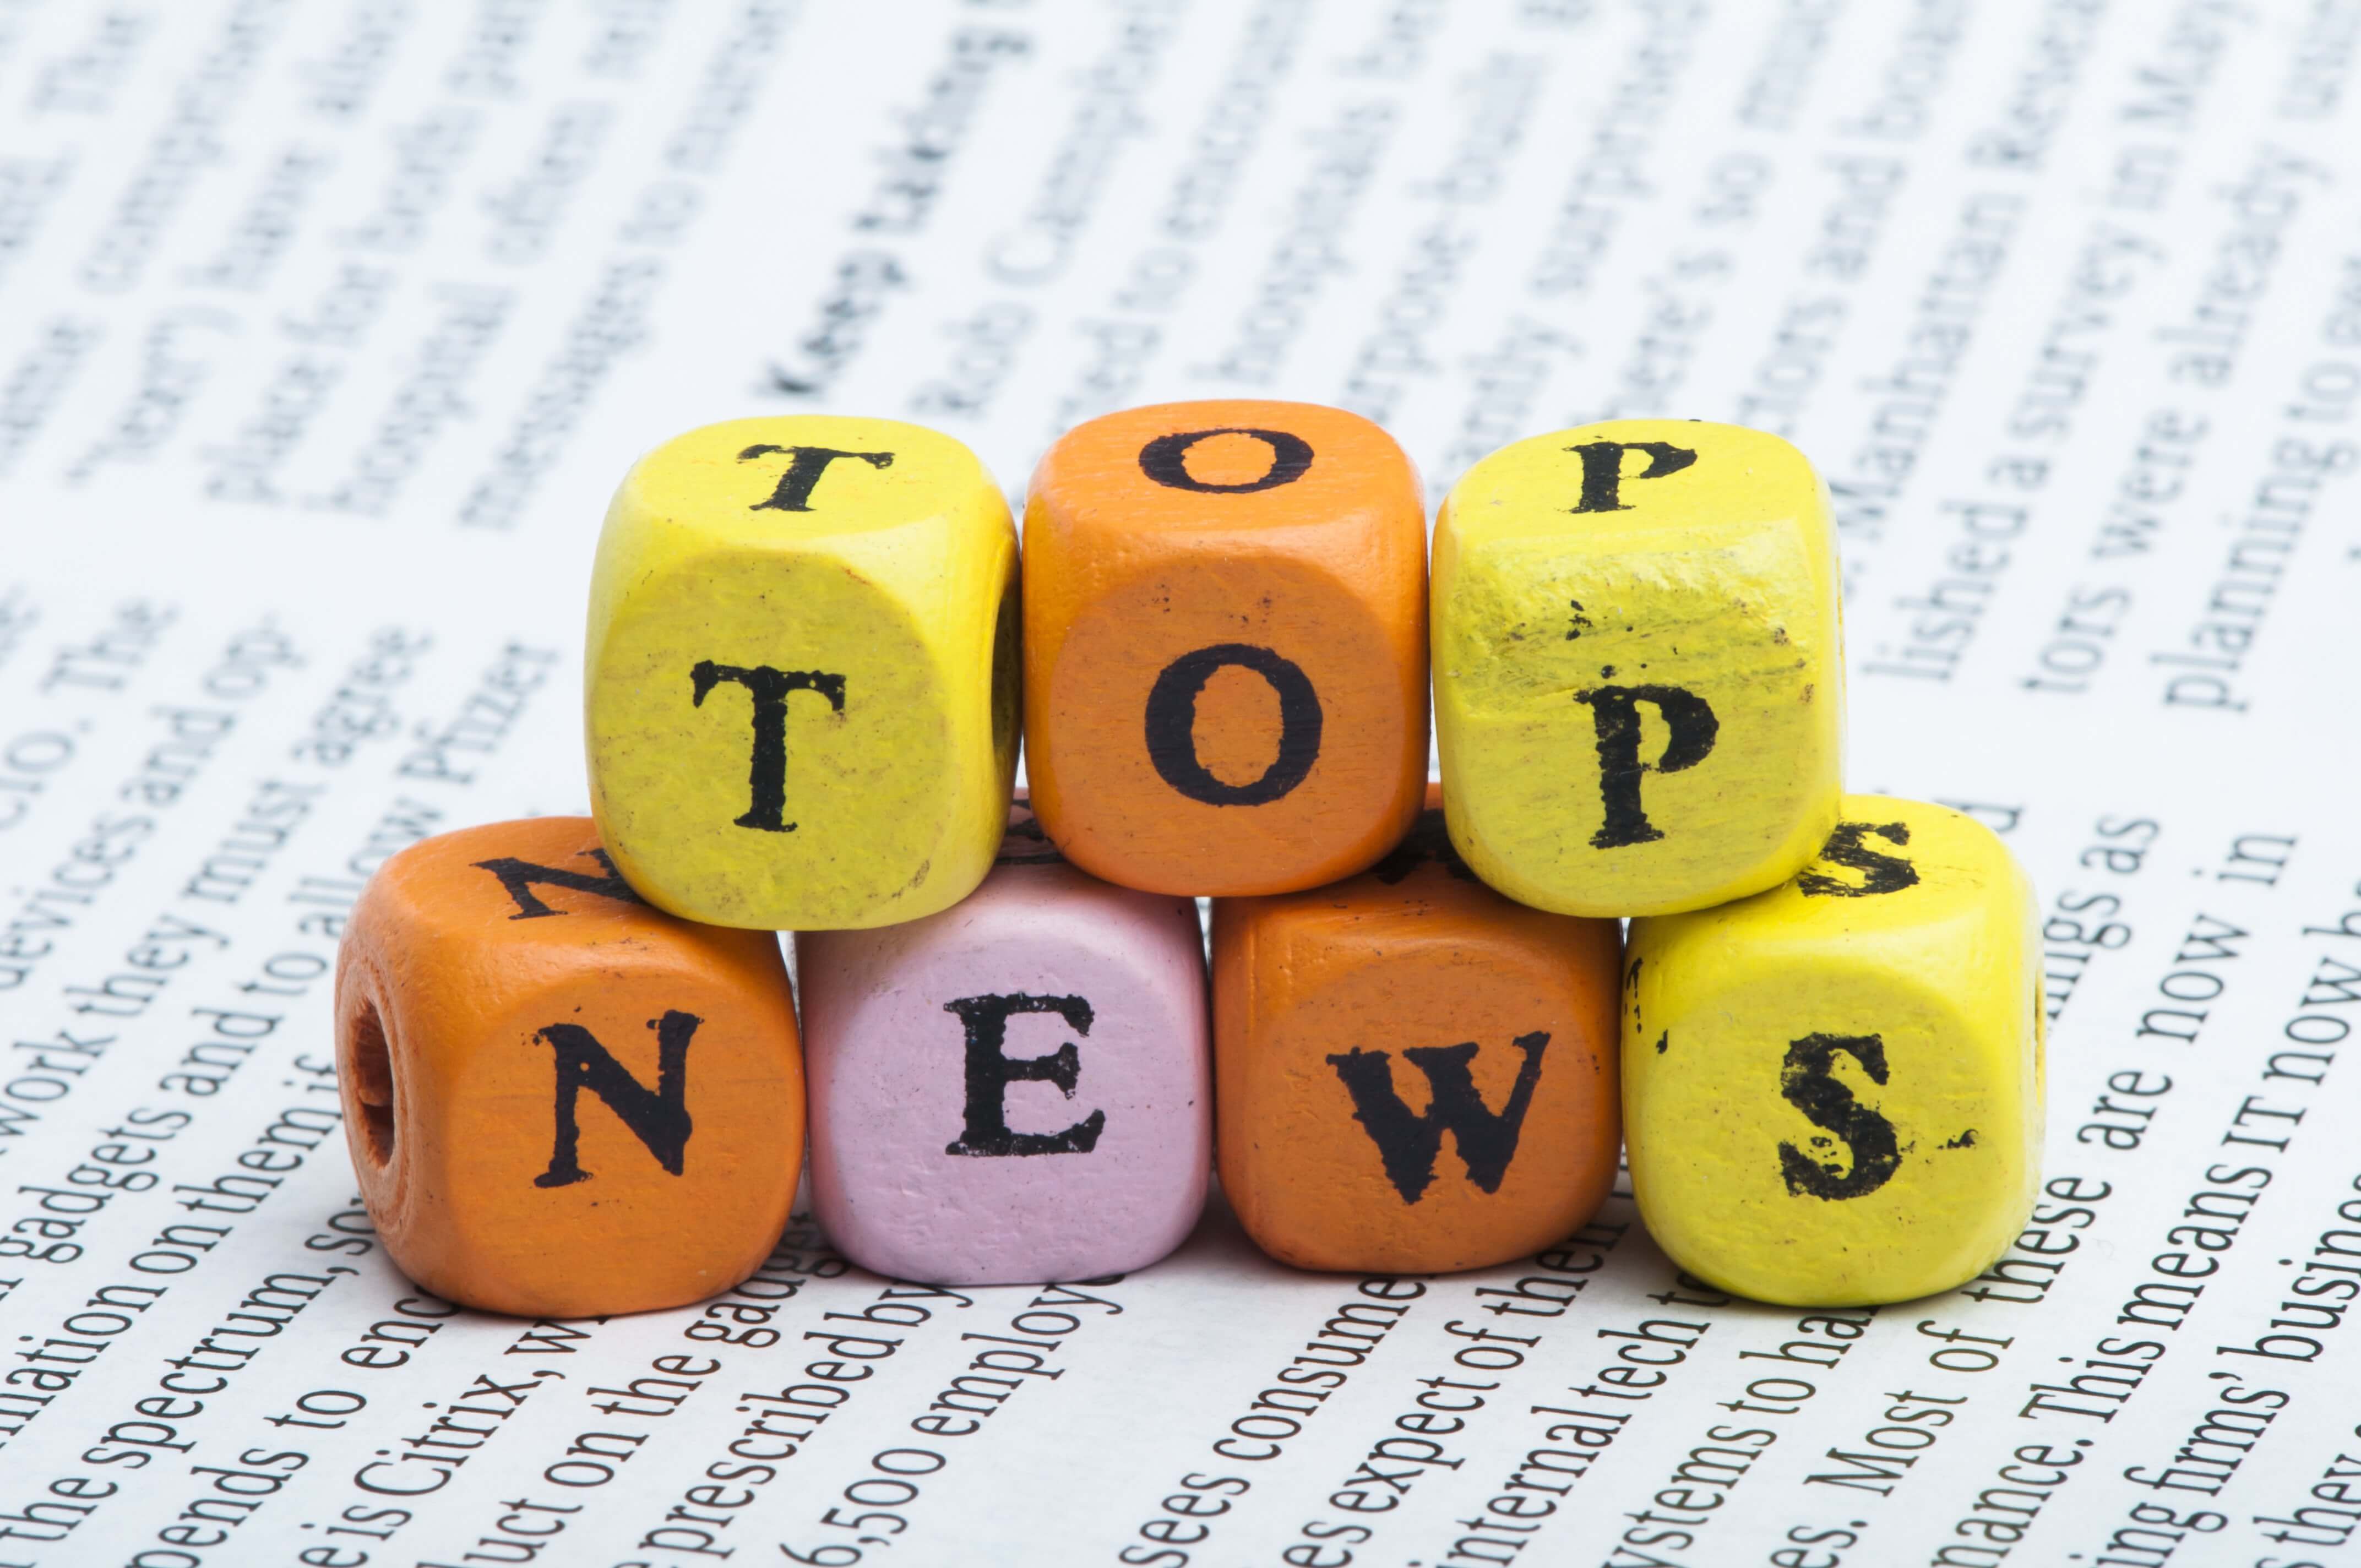 Our Top Five Picks For Executive Presence Articles from June